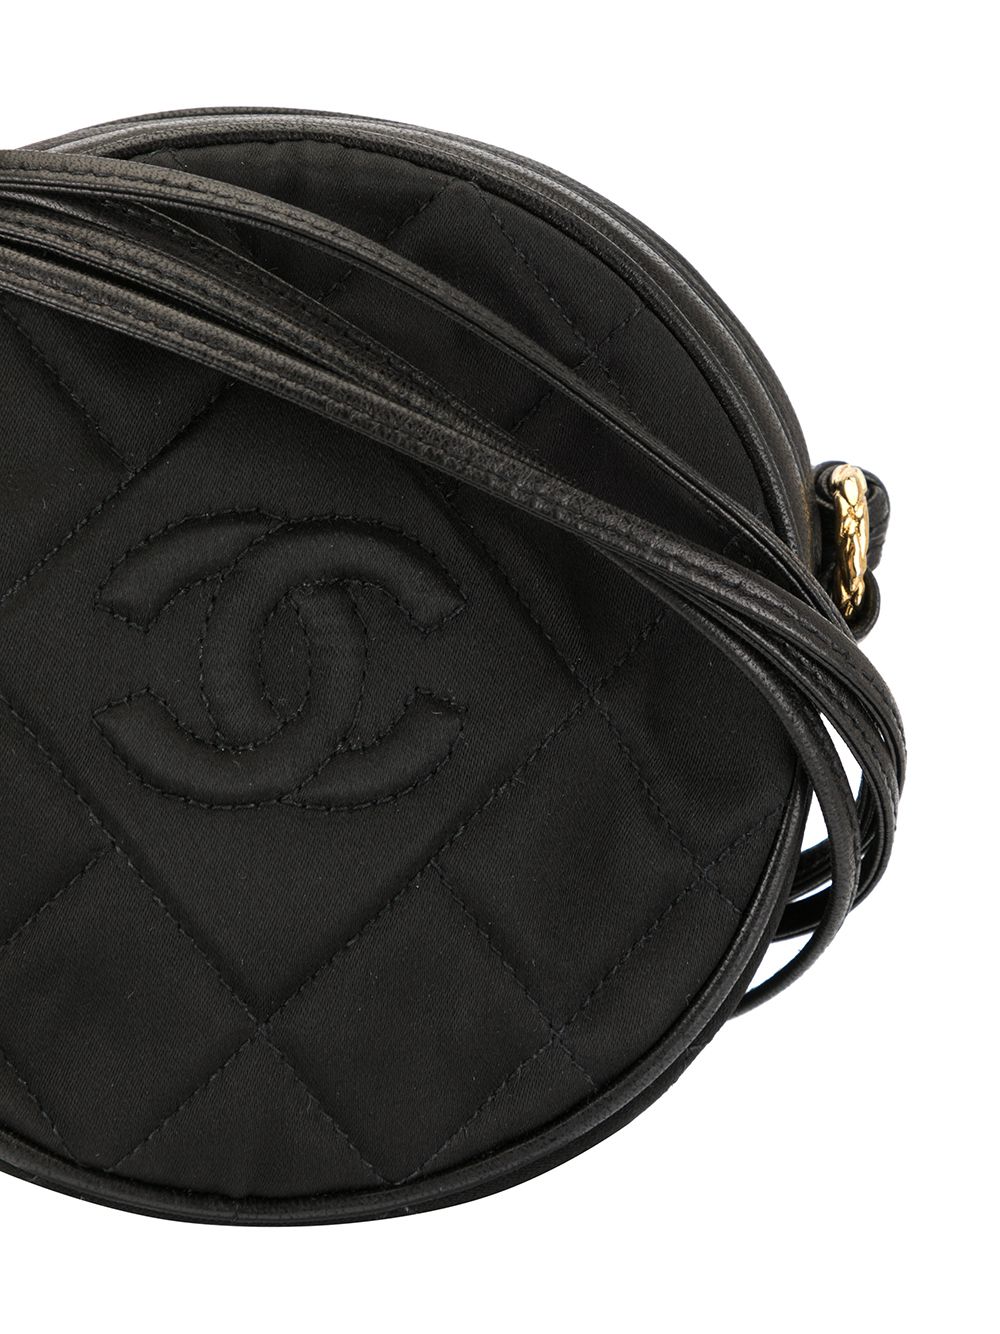 Chanel Pre-owned 1989-1991 Quilted Round Fringe Crossbody Bag - Black